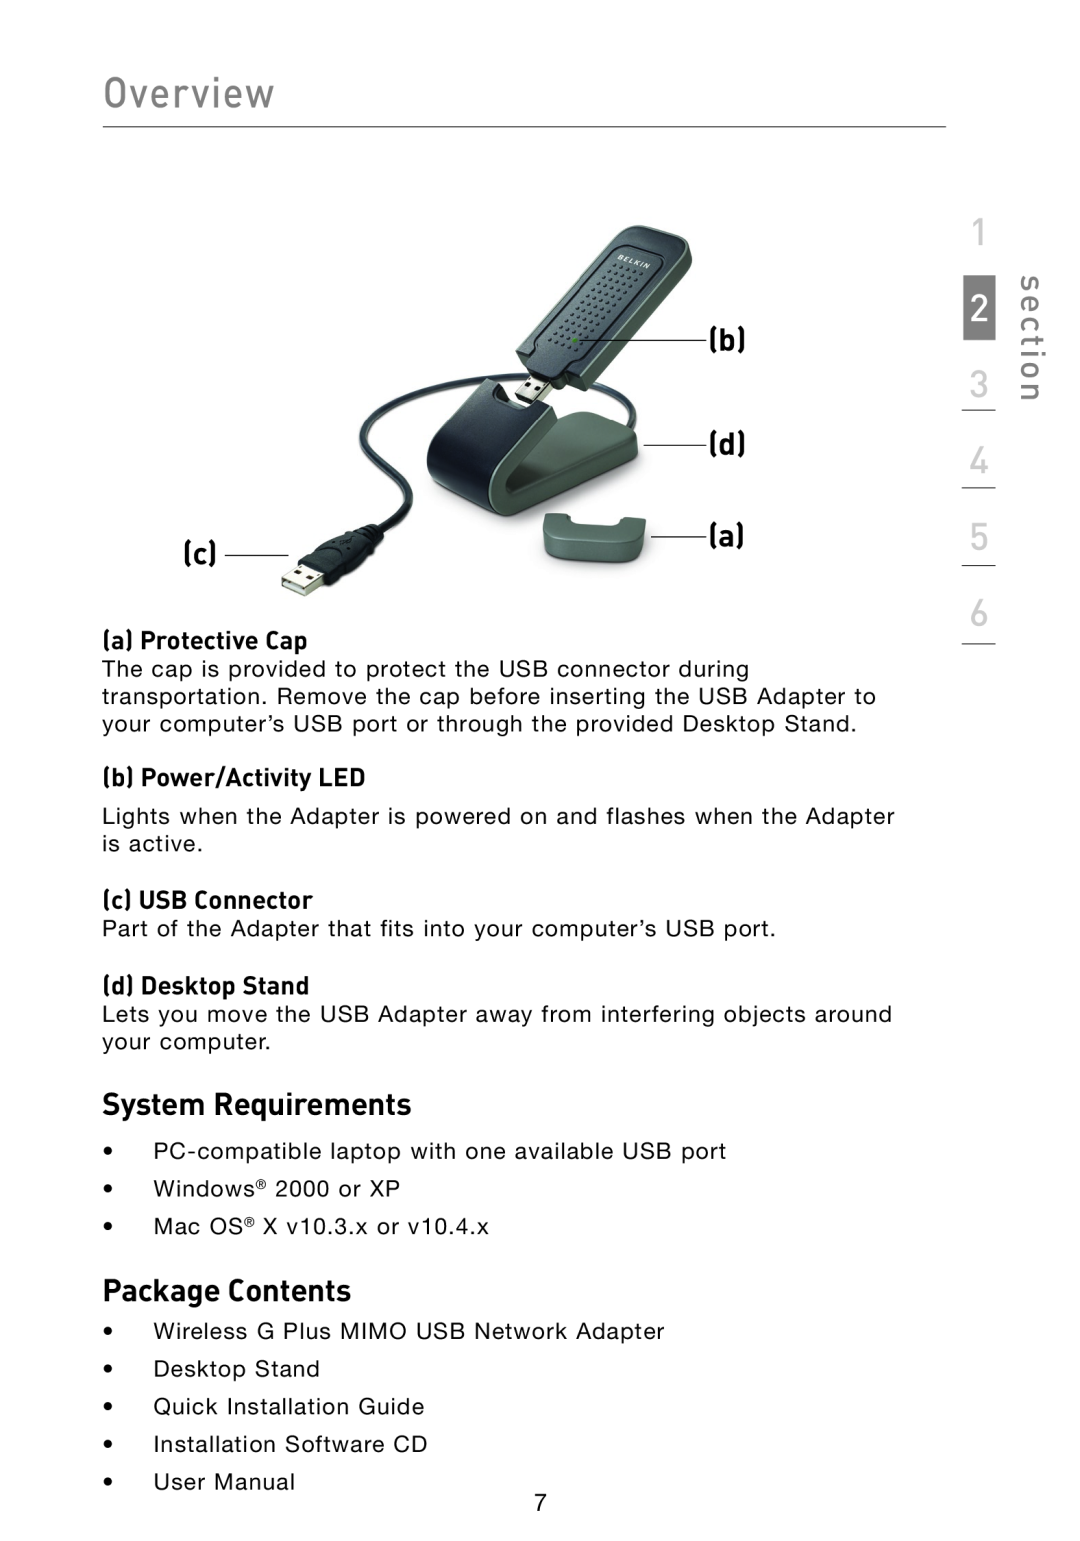 Belkin F5D9050 System Requirements, Package Contents, a Protective Cap, b Power/Activity LED, c USB Connector, Overview 